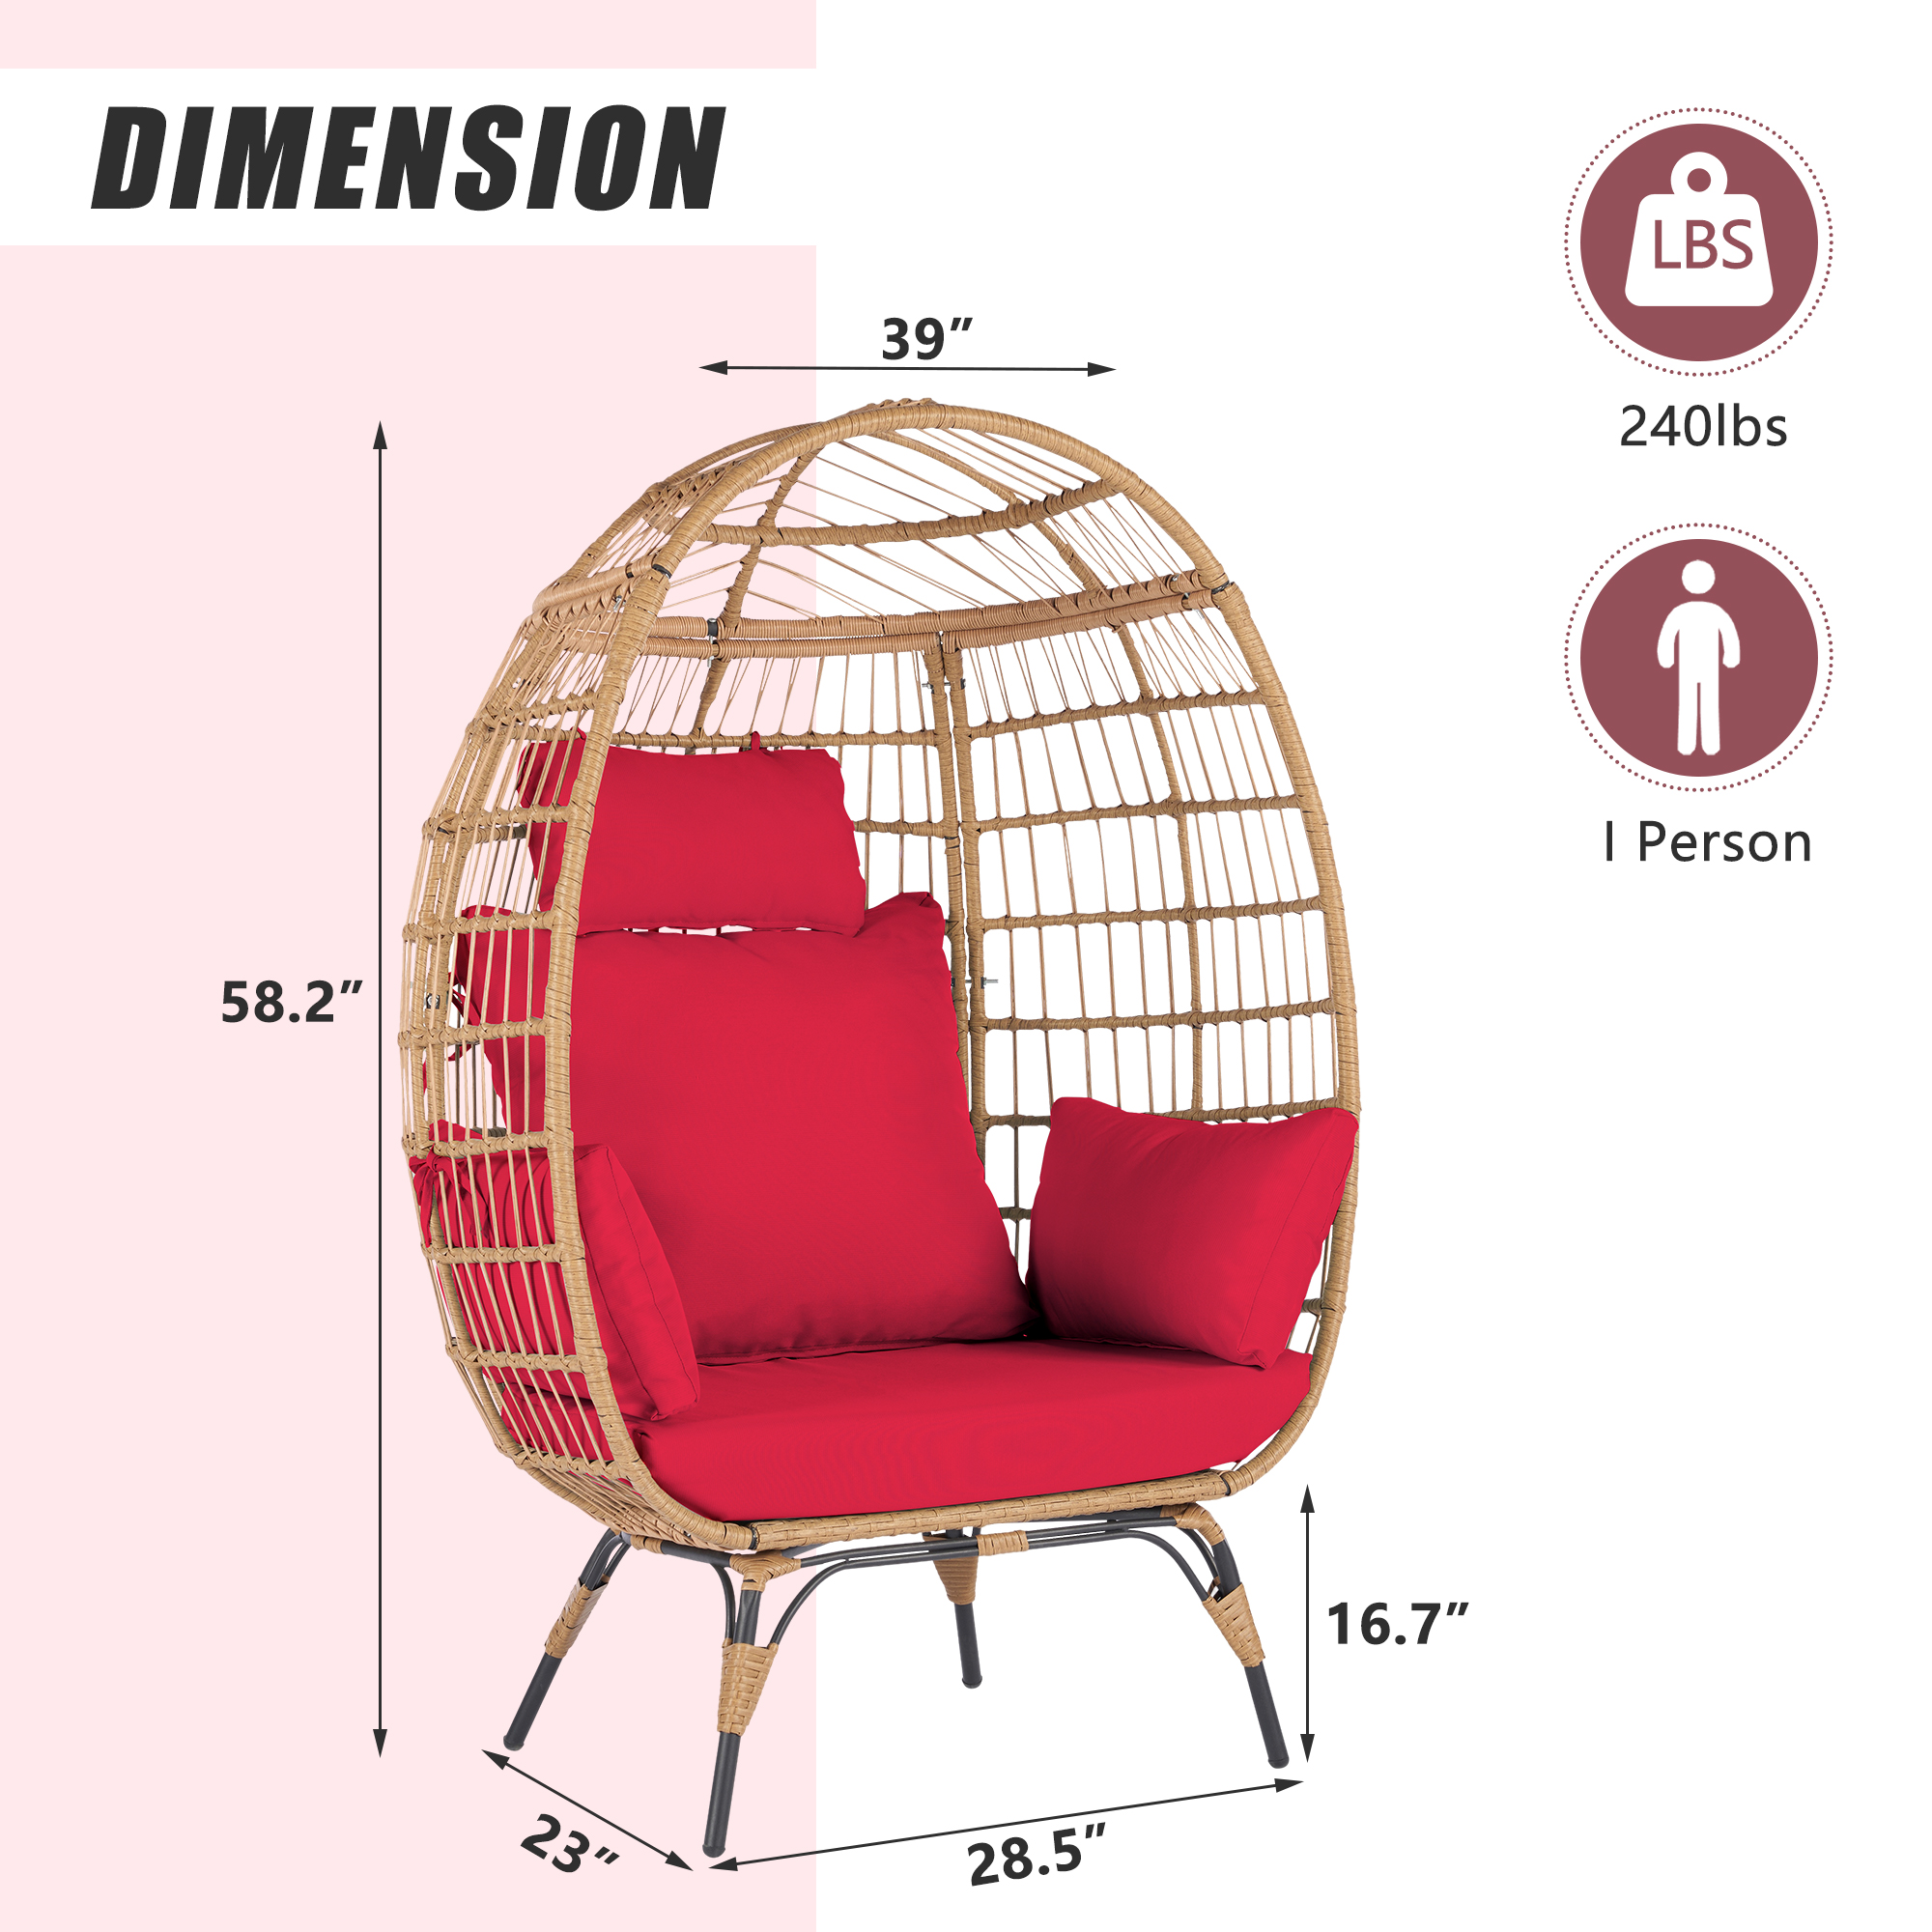 Wicker Egg Chair, Oversized Indoor Outdoor Boho Lounger Chair Stationary Egg Basket Chair, All-Weather 440lb Capacity Patio Chair, Red - image 4 of 9